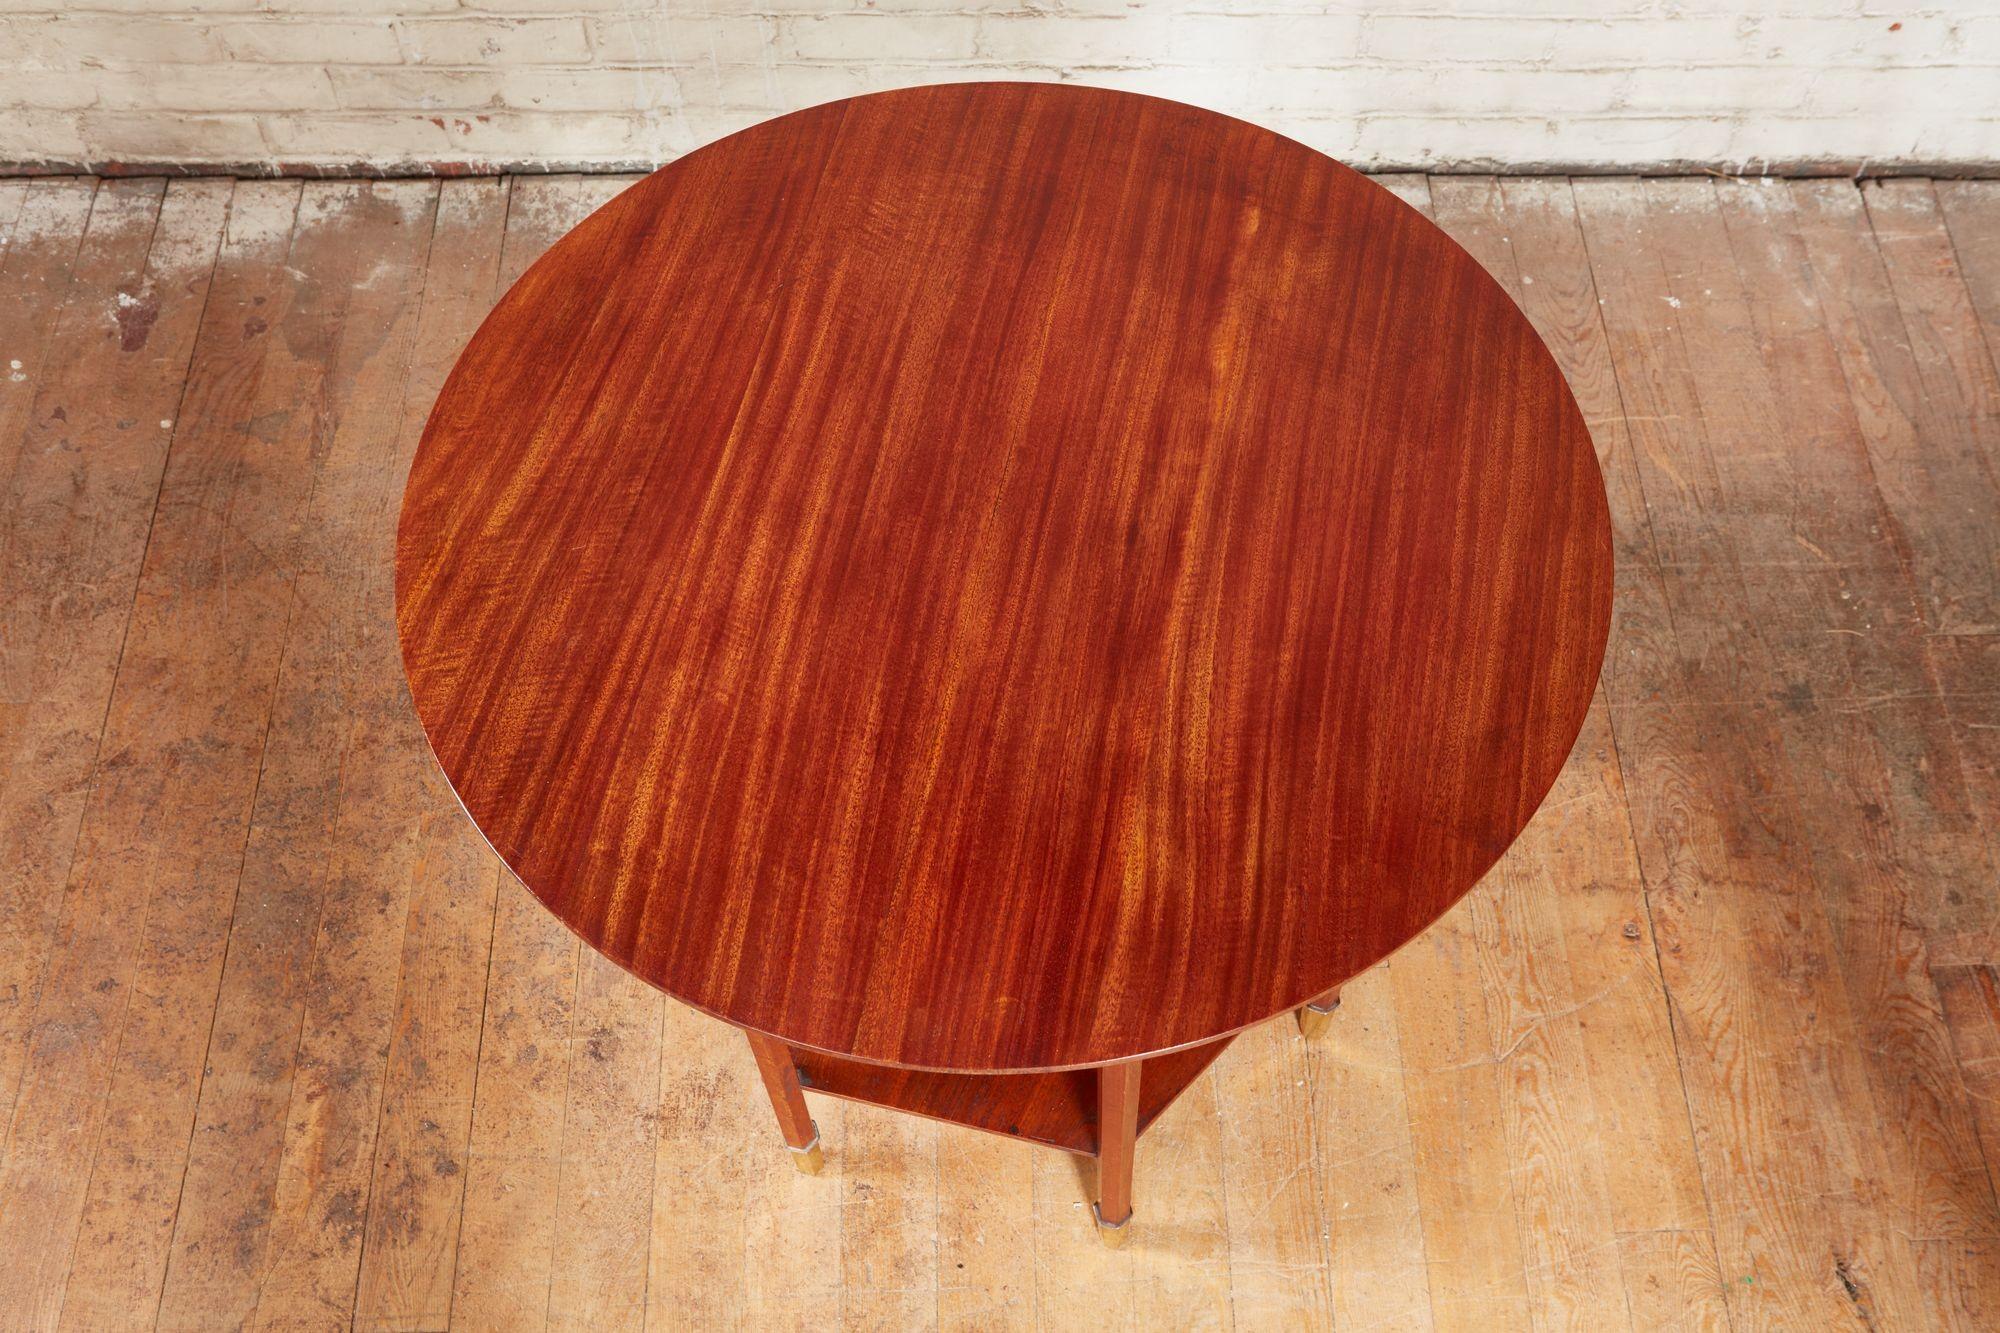 Vienna Secession Austrian Modernist Mahogany Table For Sale